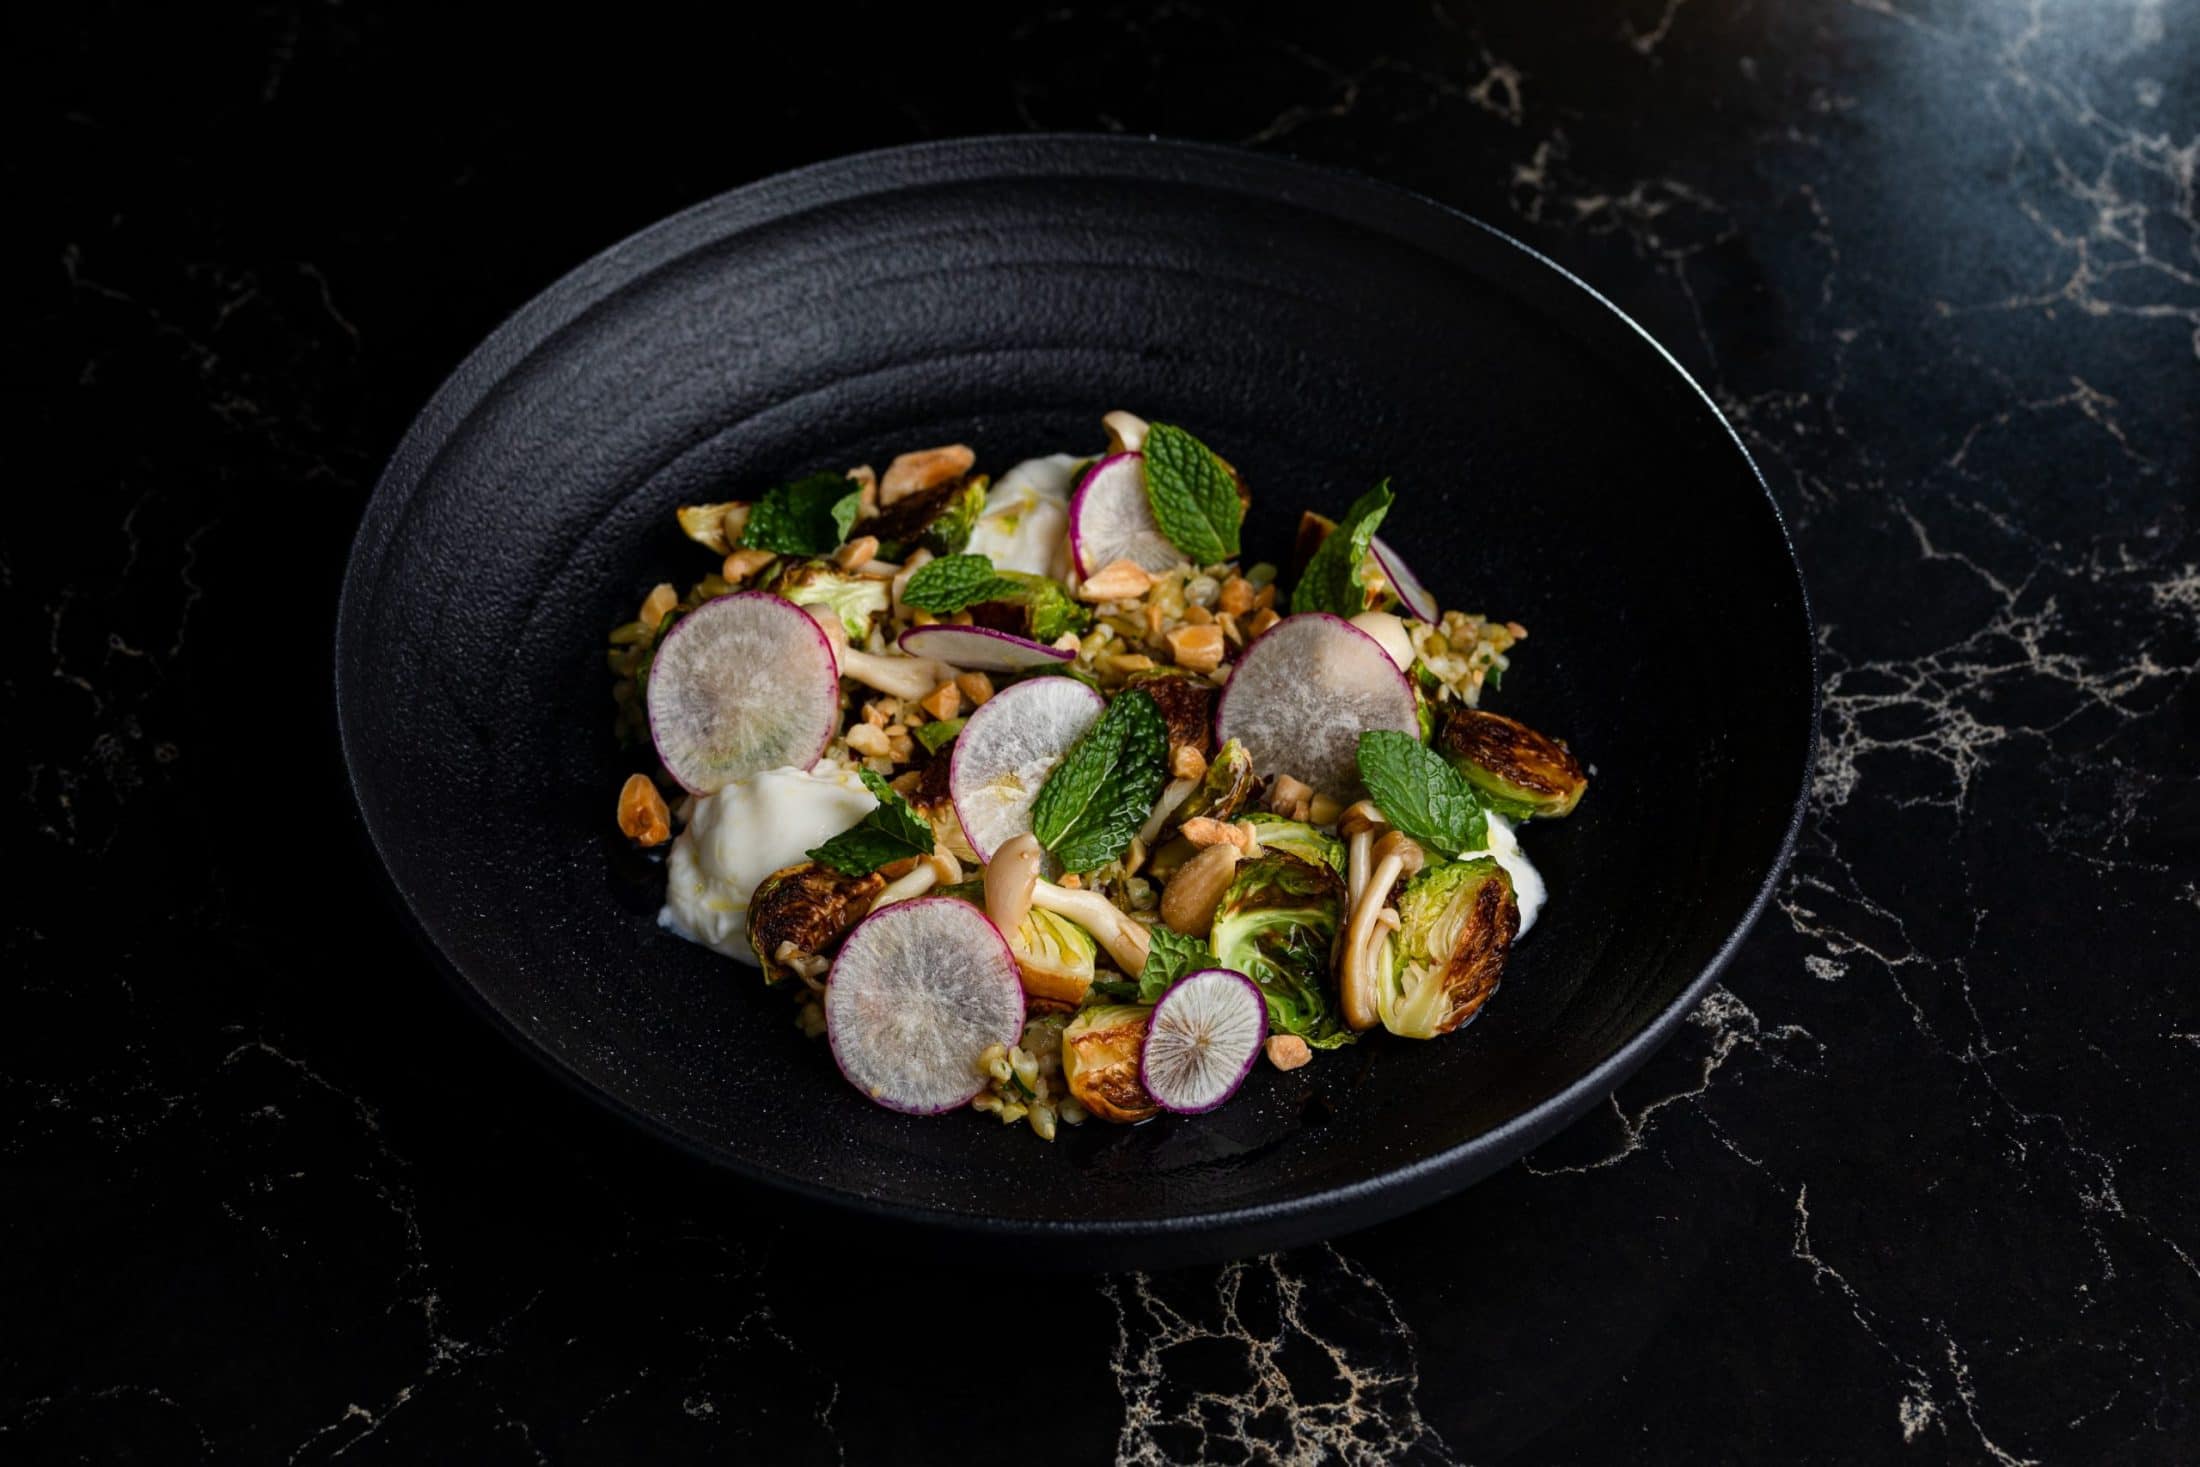 A seasonal dish featuring brussels sprouts from Itria in San Francisco.